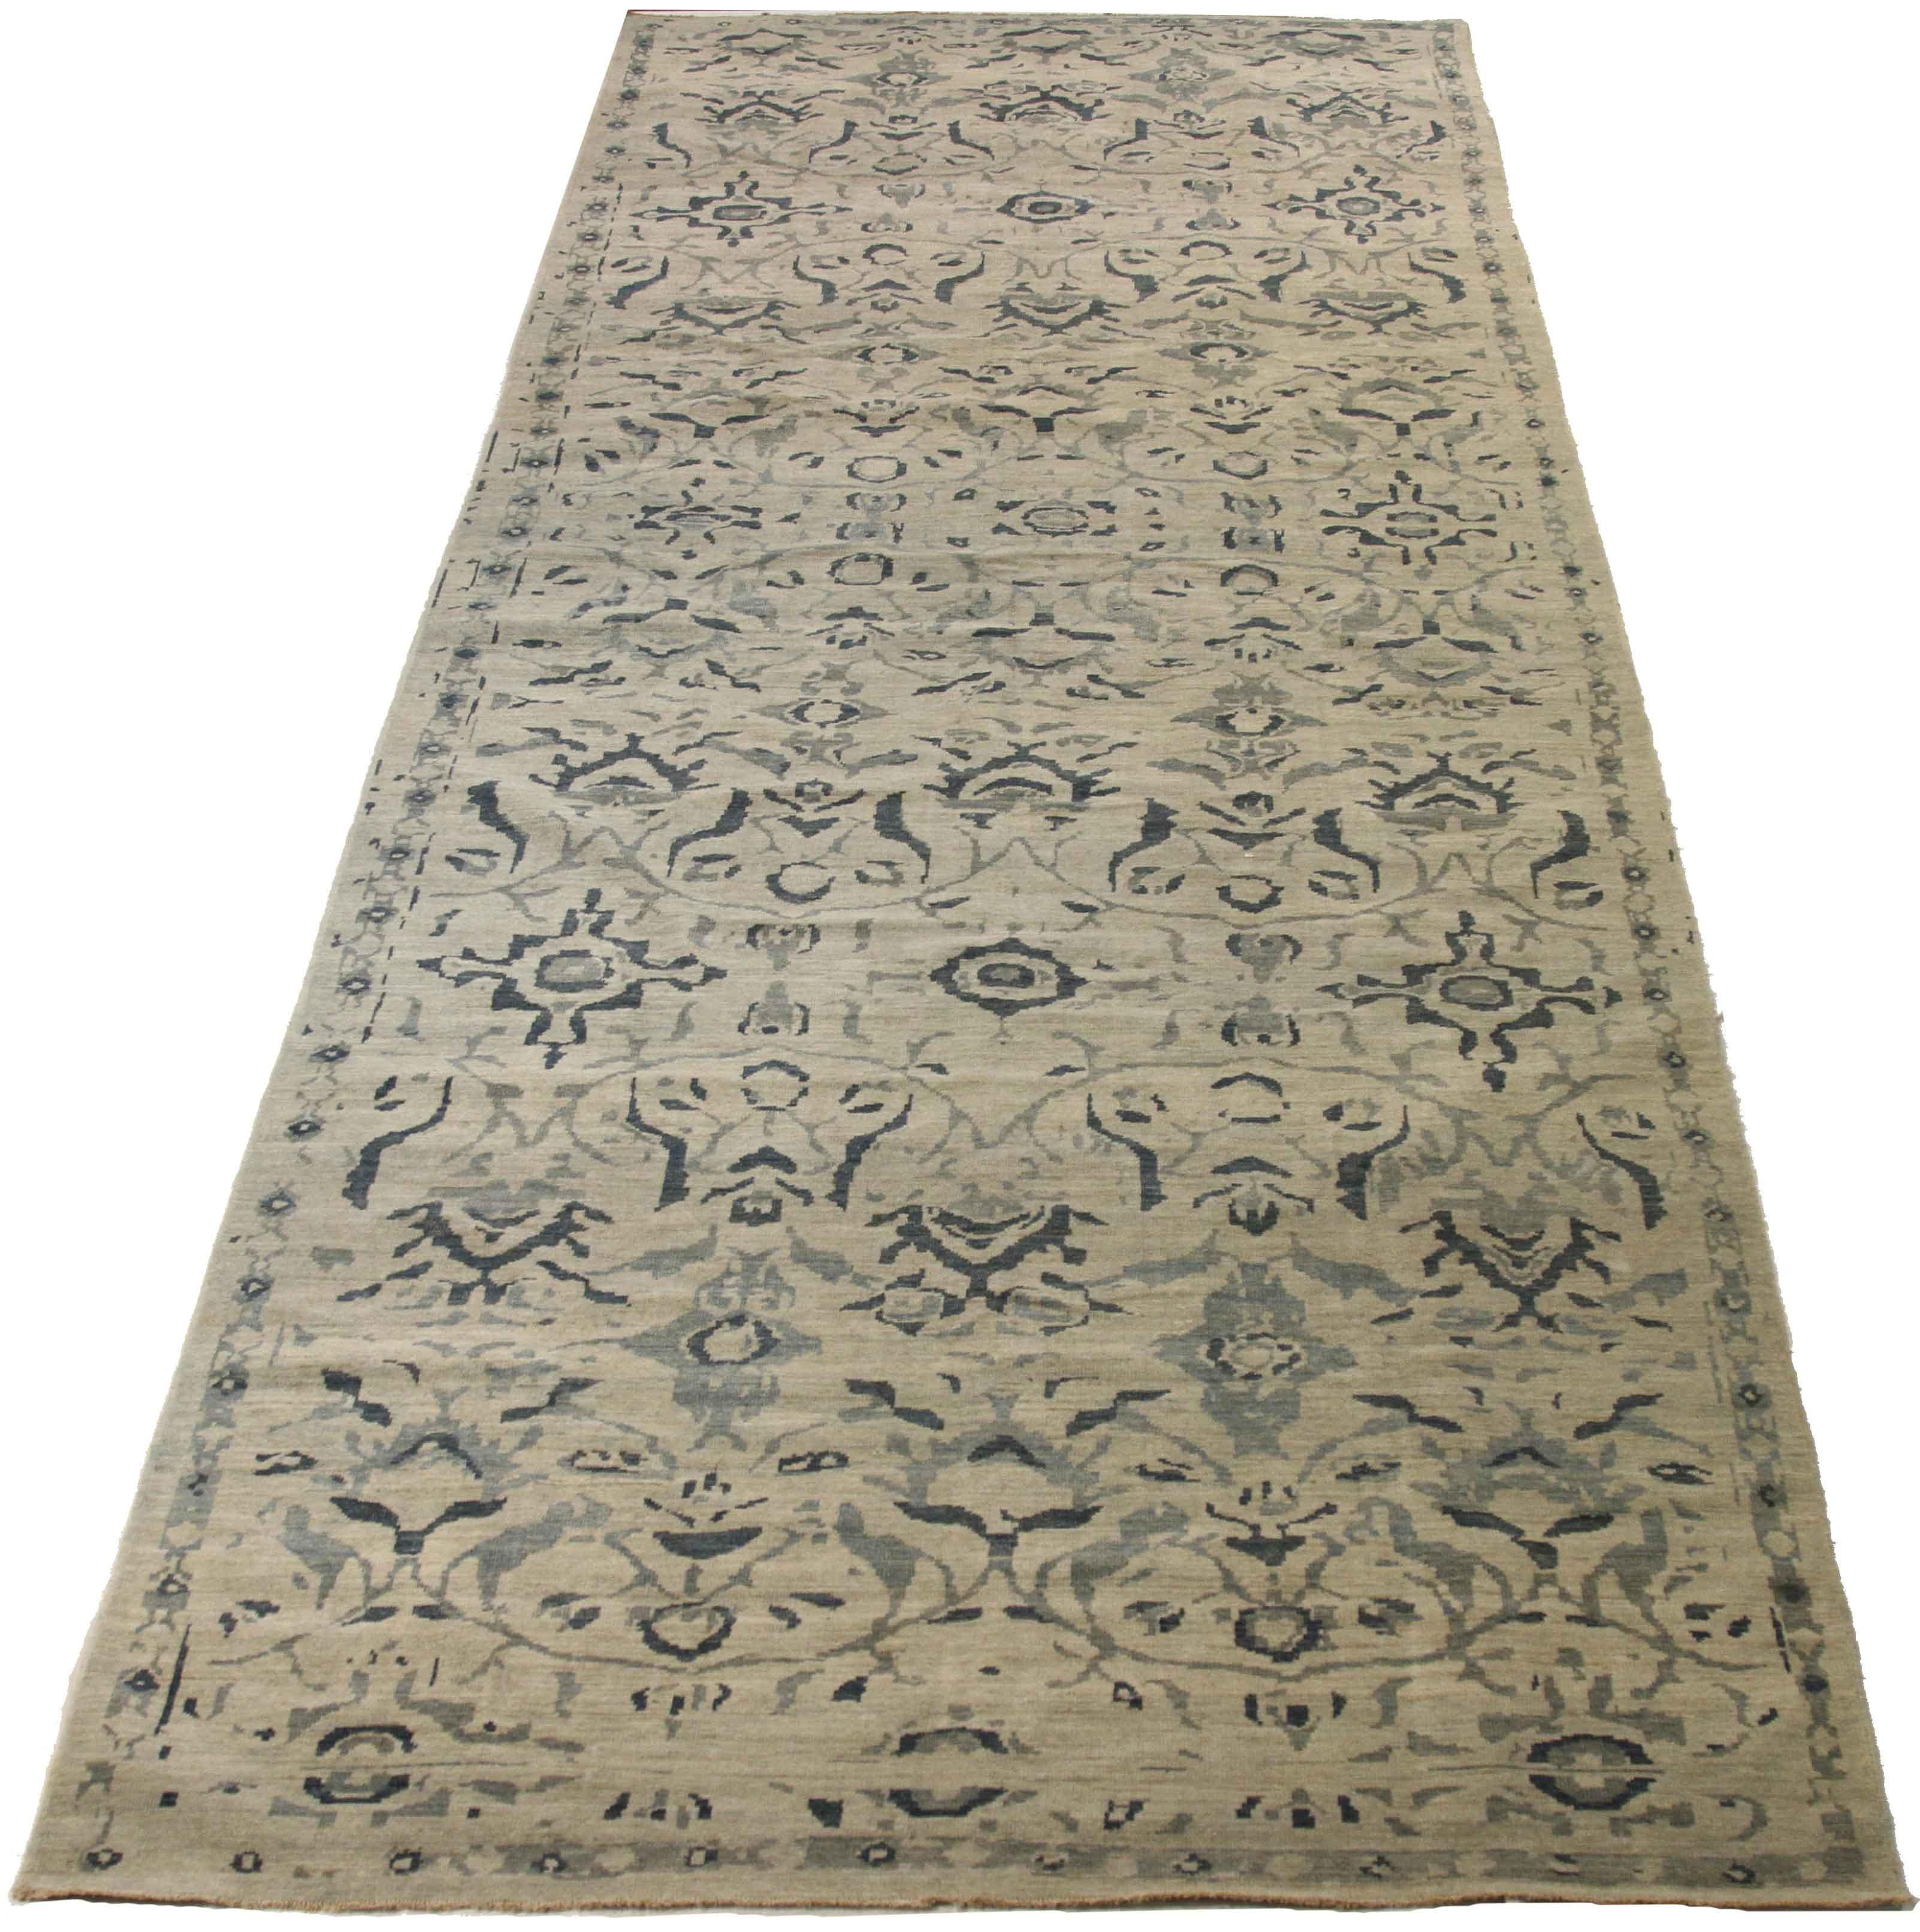 Contemporary Persian Rug Sultanabad Design with Blue and Gray ‘Boteh’ Details In Excellent Condition For Sale In Dallas, TX